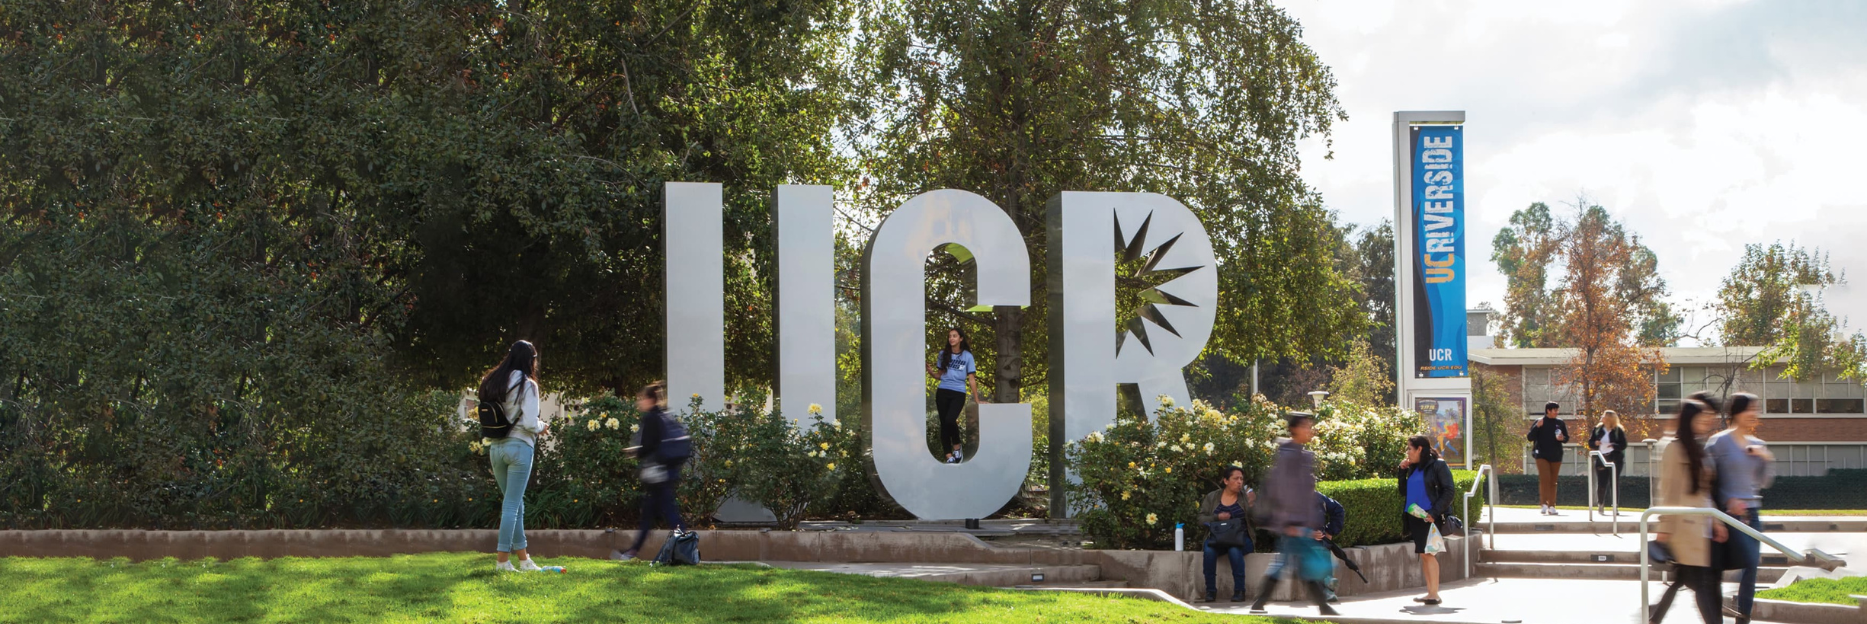 Students on the UCR campus with the UCR sign in focus